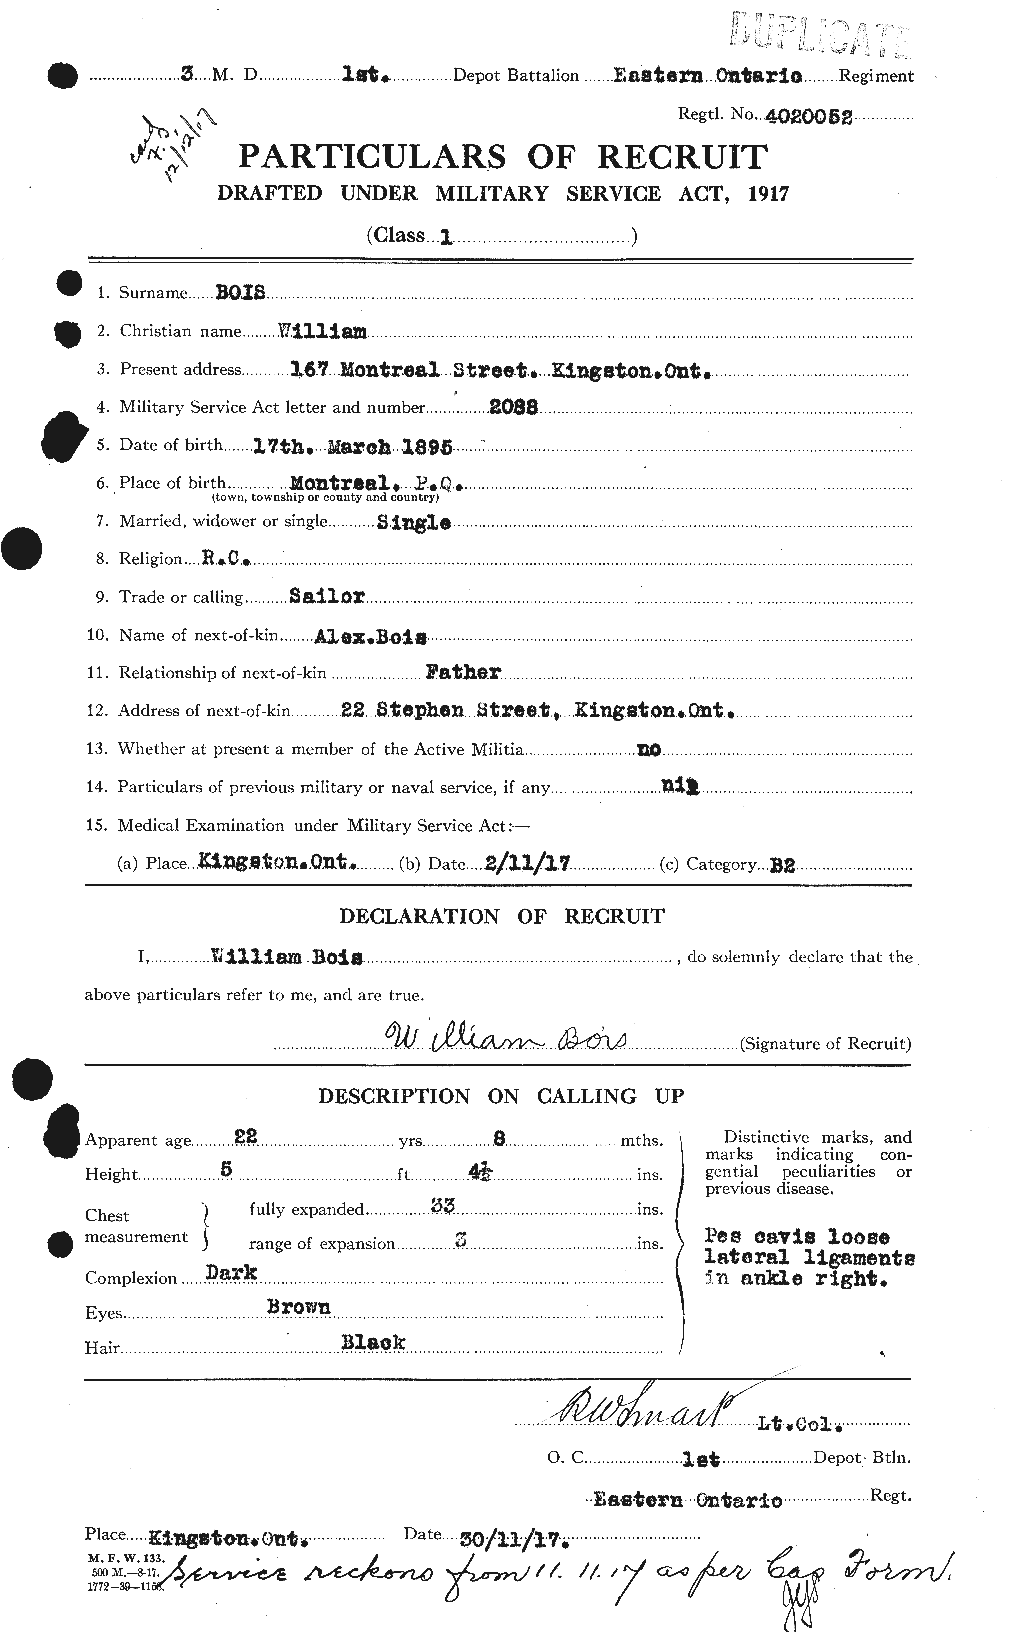 Personnel Records of the First World War - CEF 249380a